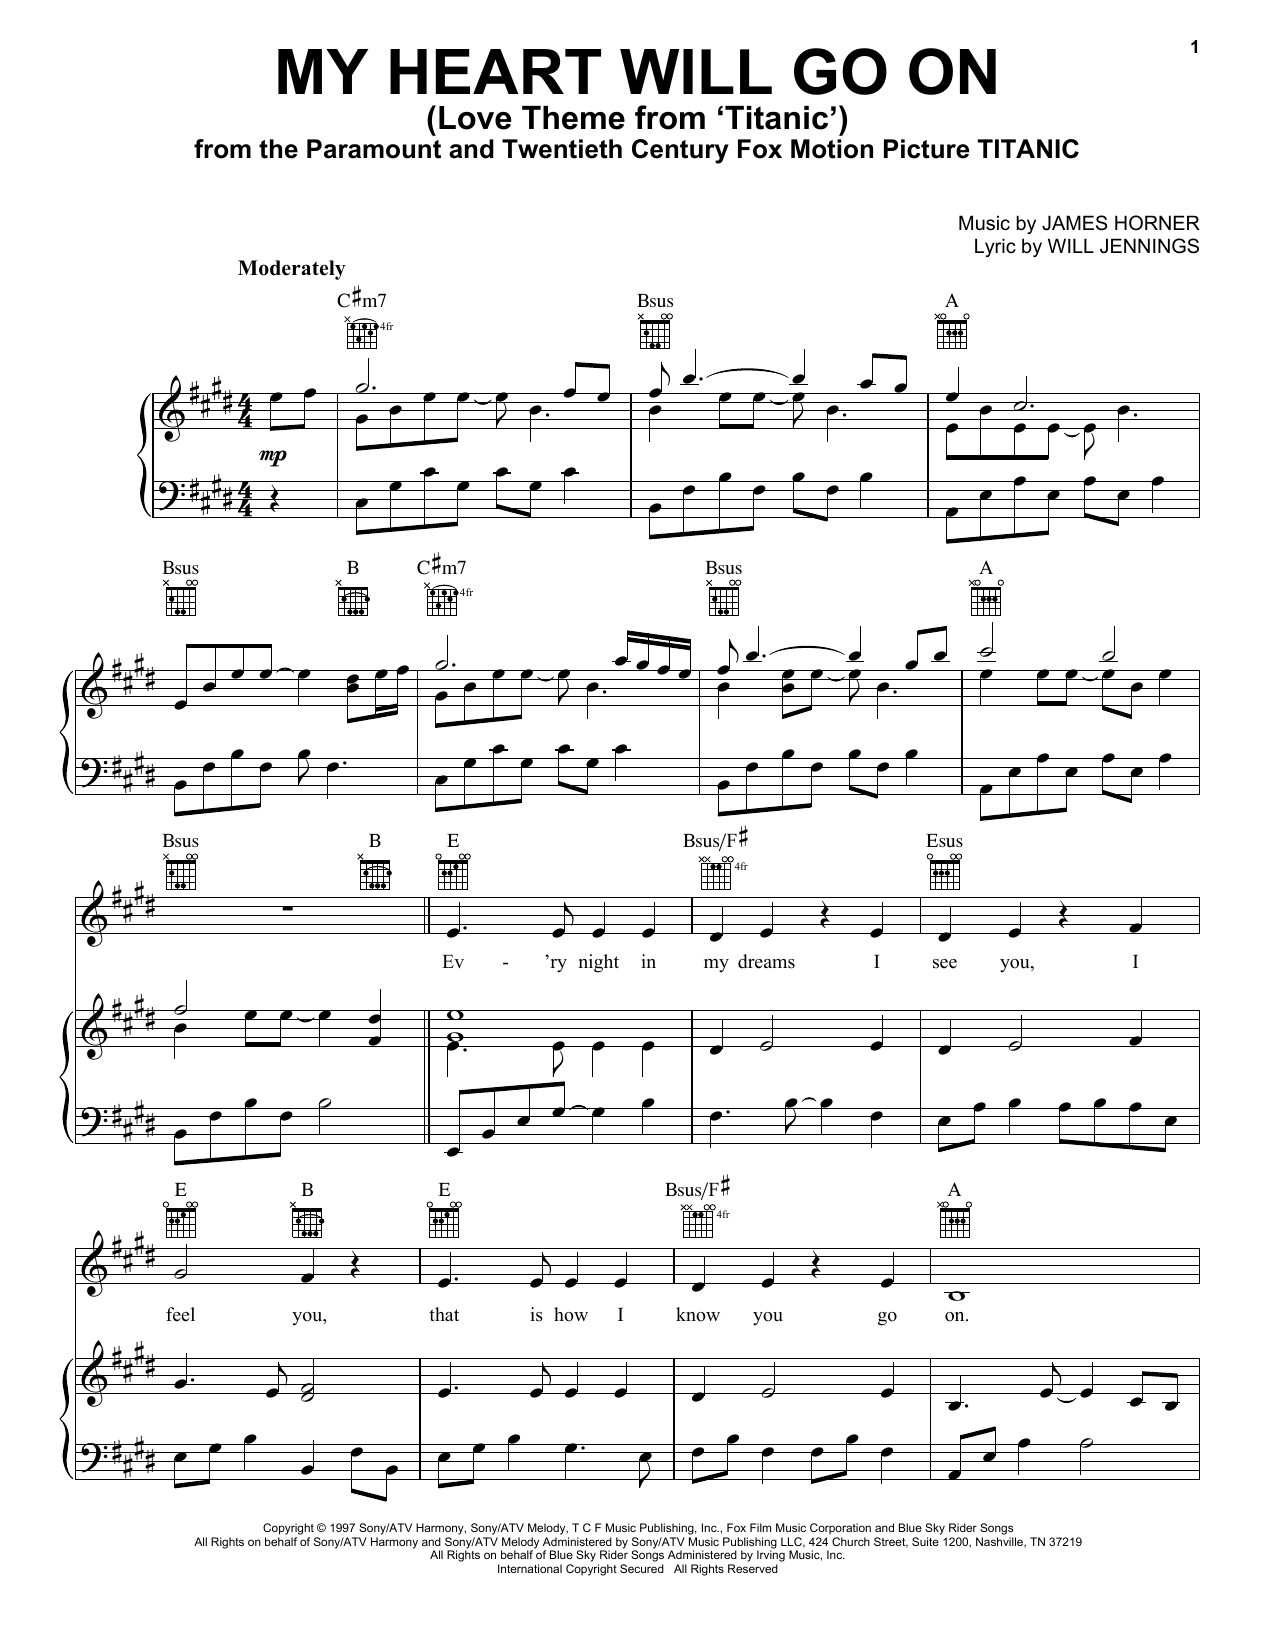 sheet music of titanic theme song on piano